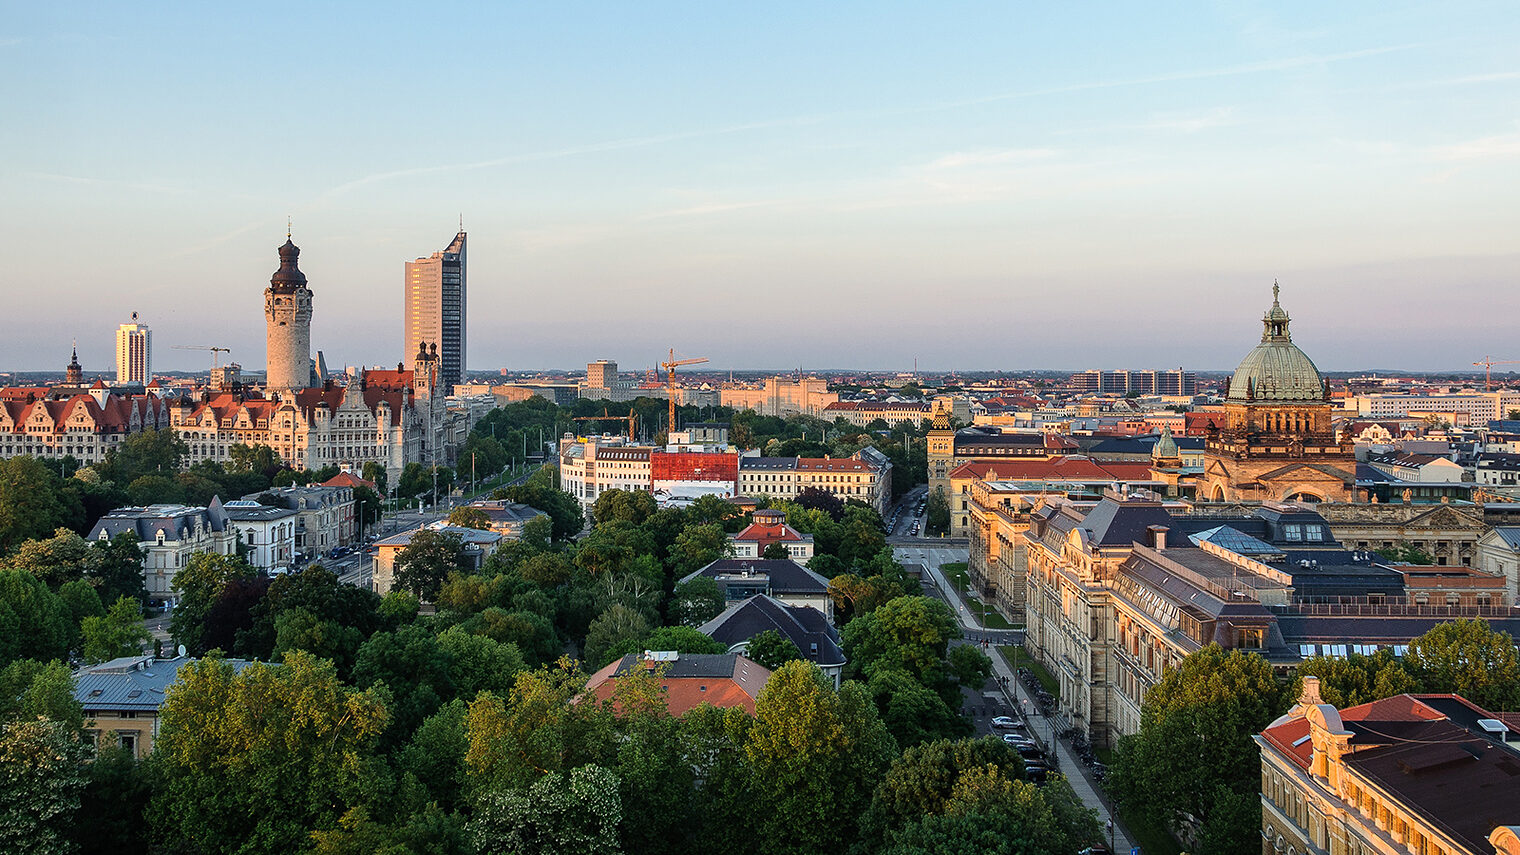 panoramic skyline of Leipzig with townhall and high court at sunset, Germany Schlagwort(e): Architecture, Germany, High court, Leipzig, Saxony, Skyline, blue, building, chapel, church, city, city hall, cityscape, color image, colorful, cultural, culture, dawn, day, dusk, europe, evening, famous, landmark, lookout, mission, no people, outdoors, photography, picturesque, roof, roof top, scenery, scenic, shrine, sightseeing, sky, sunset, tourism, tourist spot, tower, town, town hall, travel, tribunal, twilight, university, view